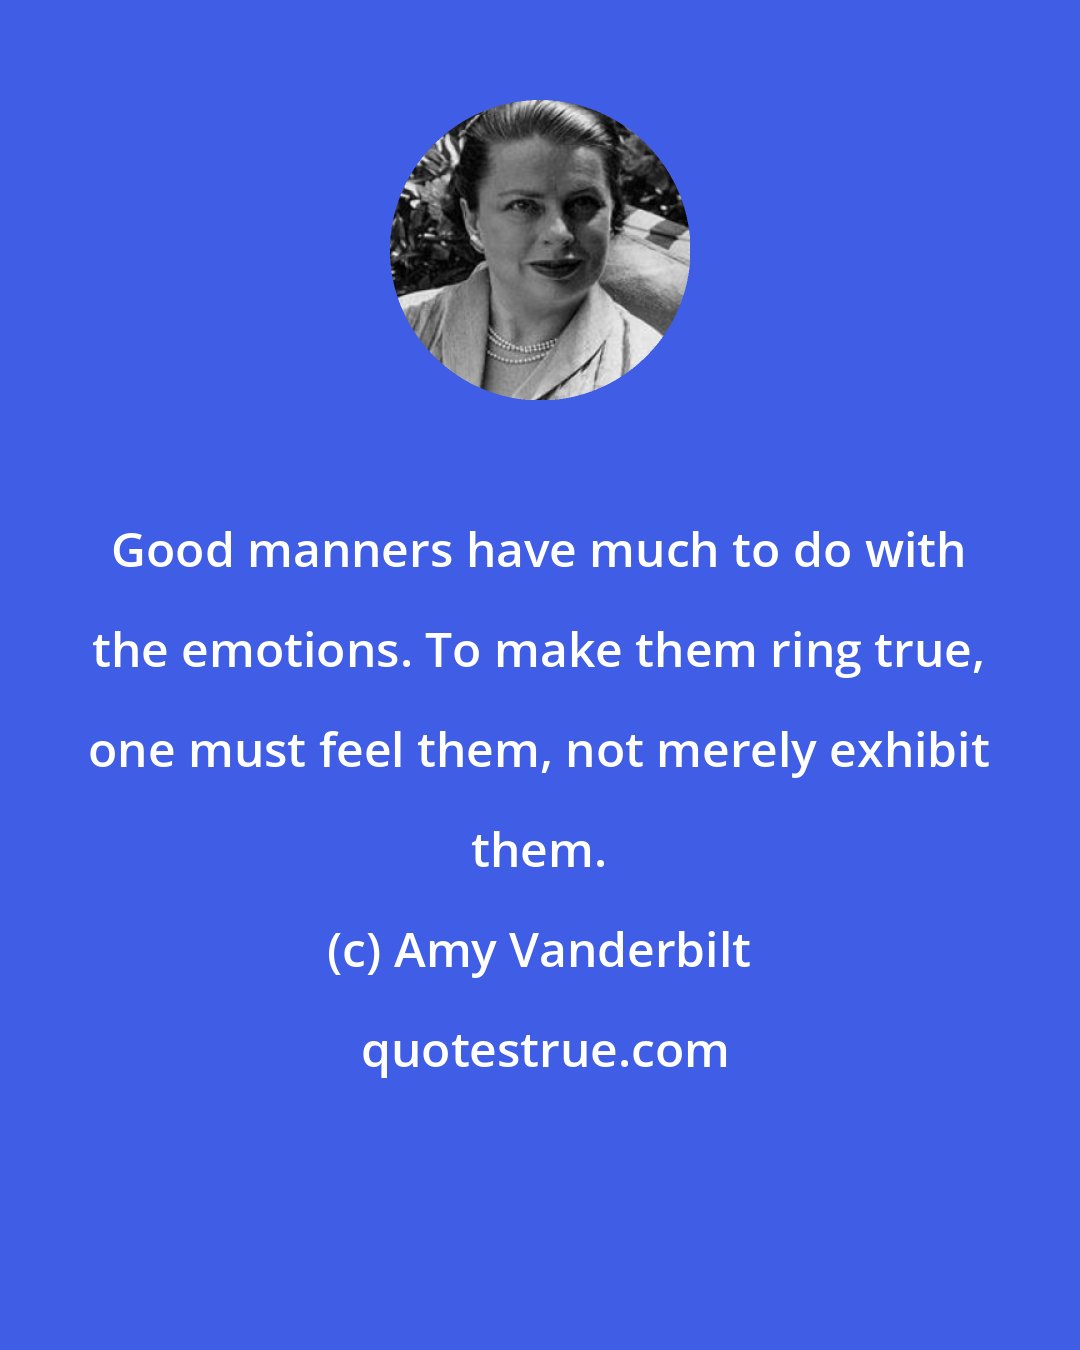 Amy Vanderbilt: Good manners have much to do with the emotions. To make them ring true, one must feel them, not merely exhibit them.